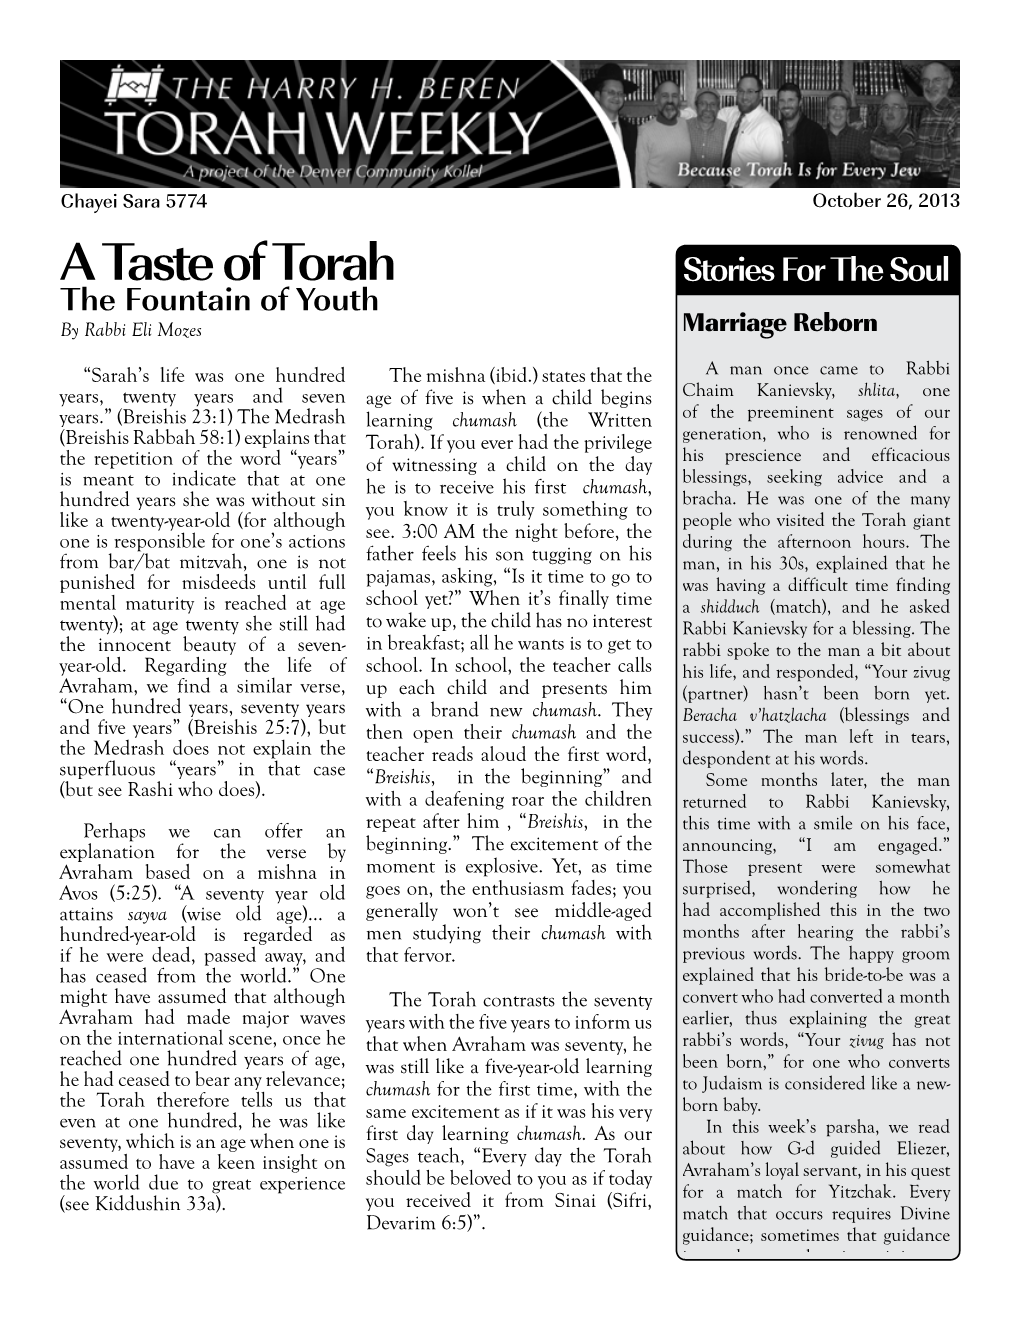 A Taste of Torah Stories for the Soul the Fountain of Youth by Rabbi Eli Mozes Marriage Reborn